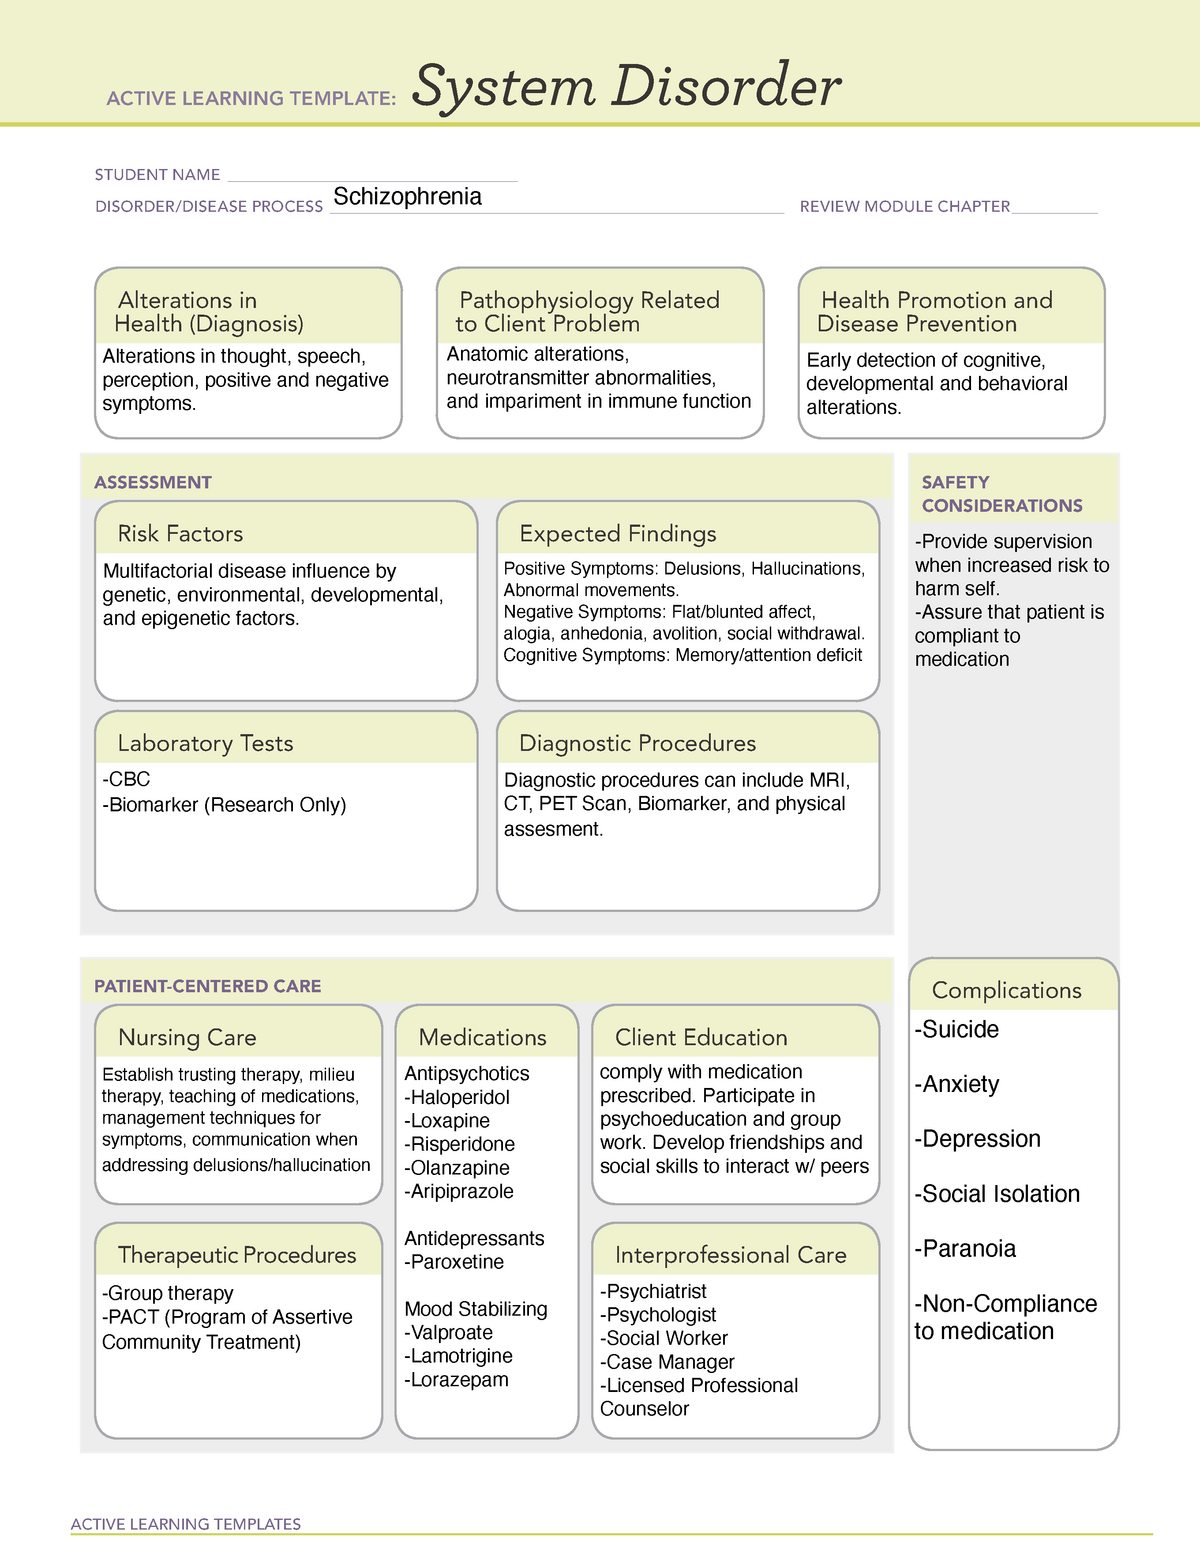 Schizophrenia Disorder System Sheet ACTIVE LEARNING TEMPLATES System Disorder STUDENT NAME